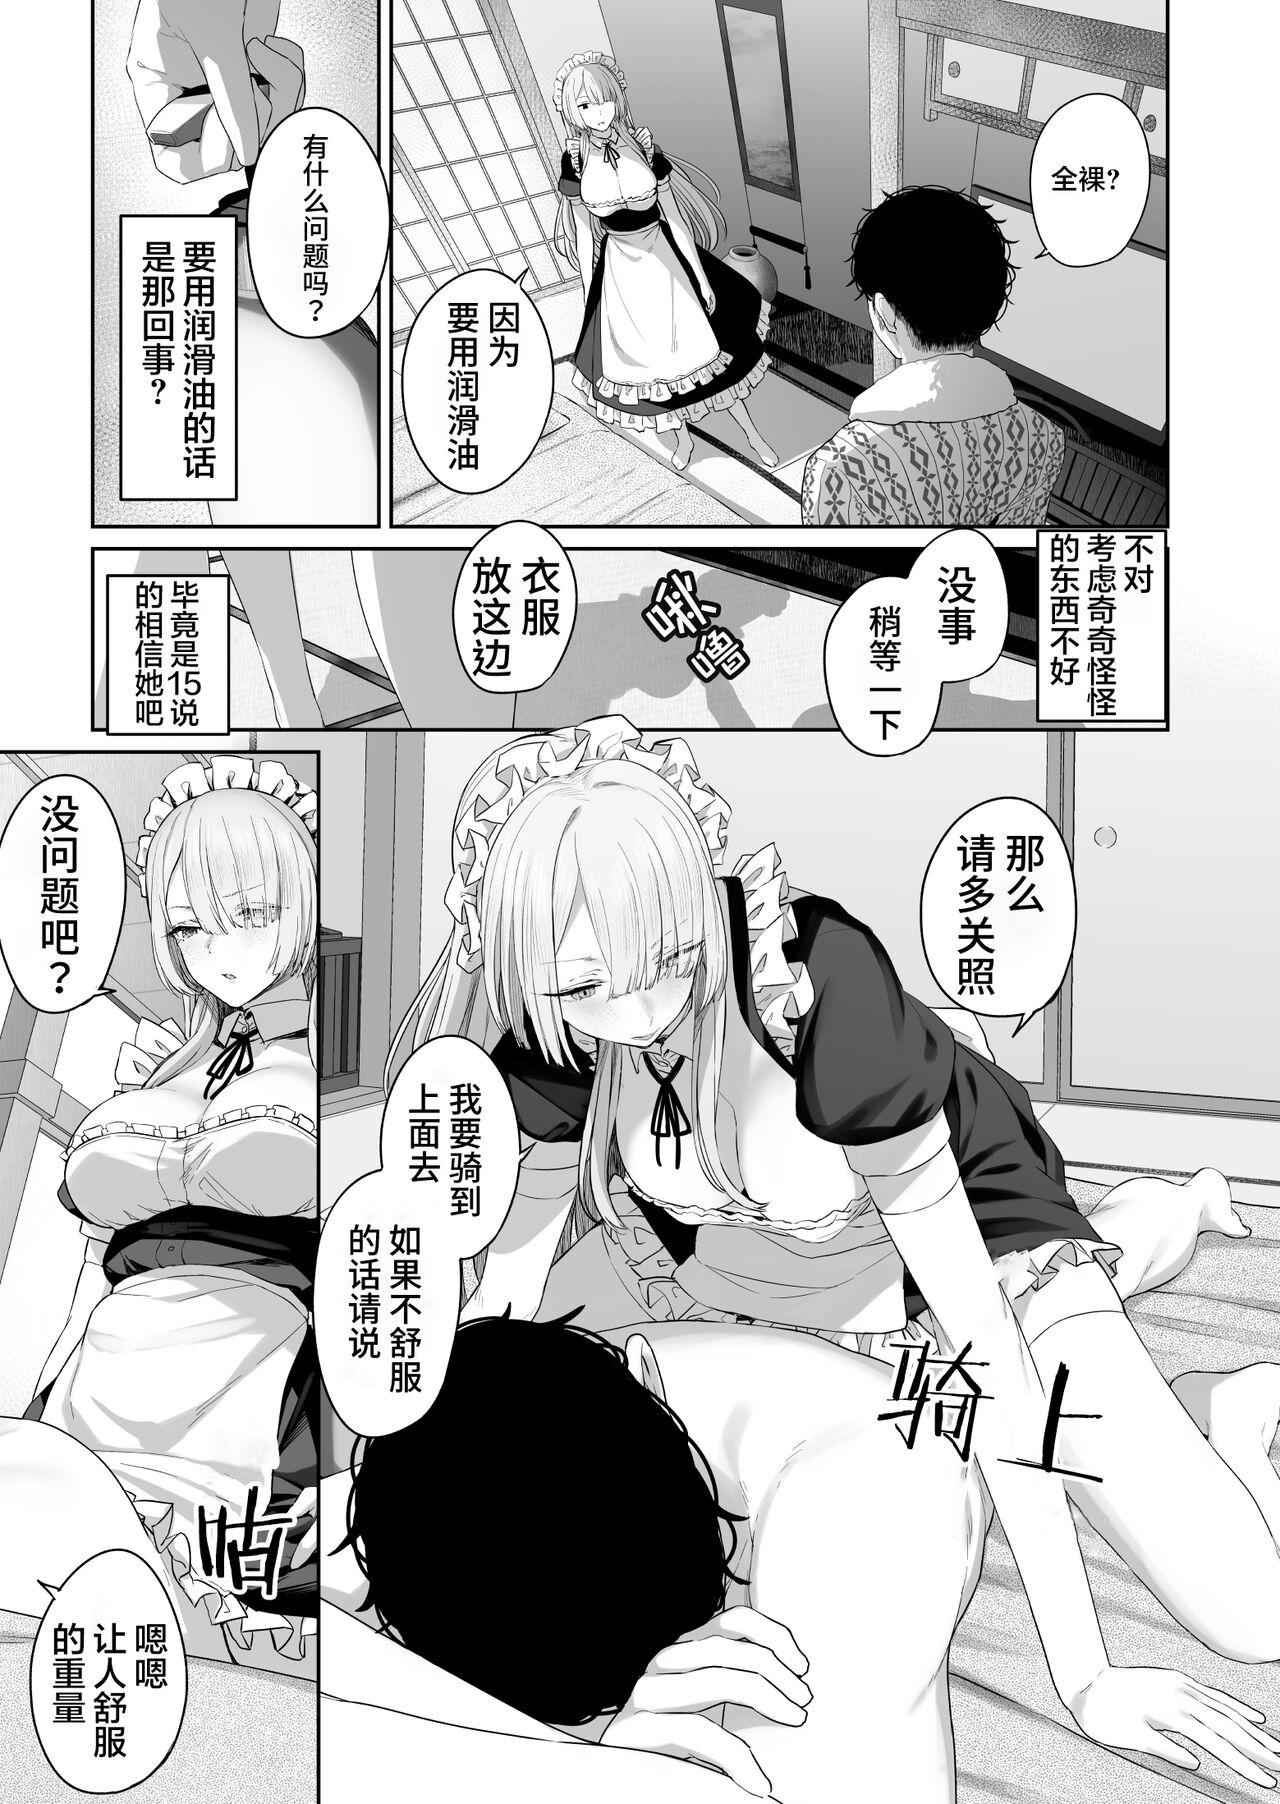 Price AK15の進捗1 - Girls frontline Massages - Page 4